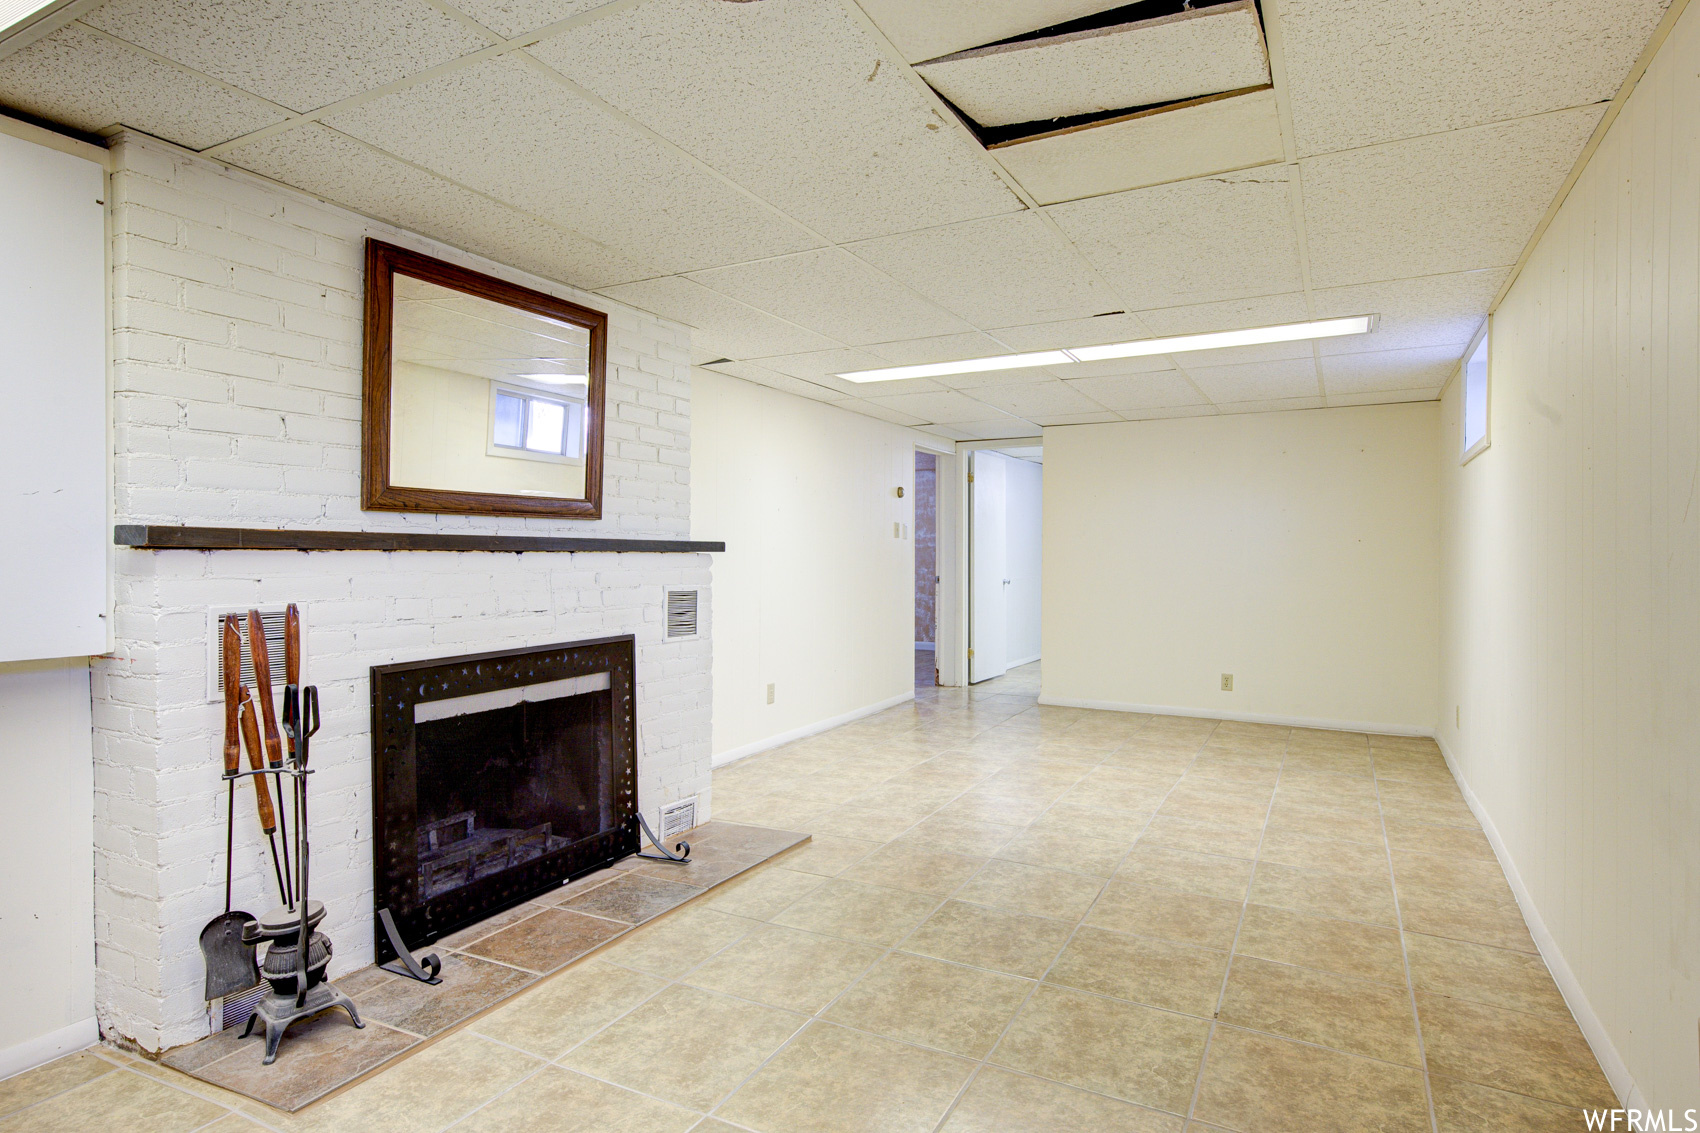 Unfurnished living room with a drop ceiling, a fireplace, and brick wall